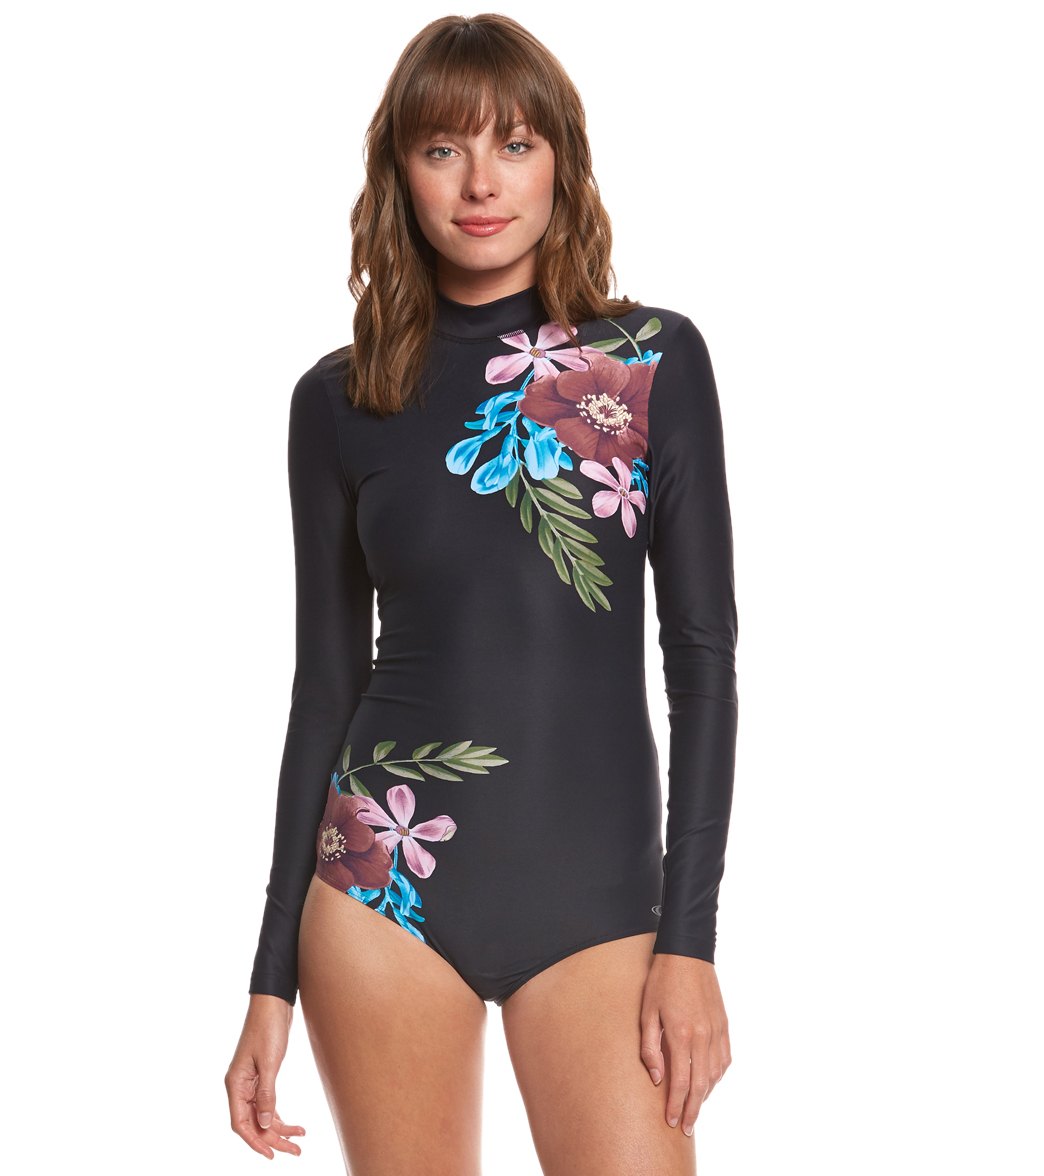 O'Neill 365 Women's Glamour L/S One Piece Swimsuit at SwimOutlet.com ...